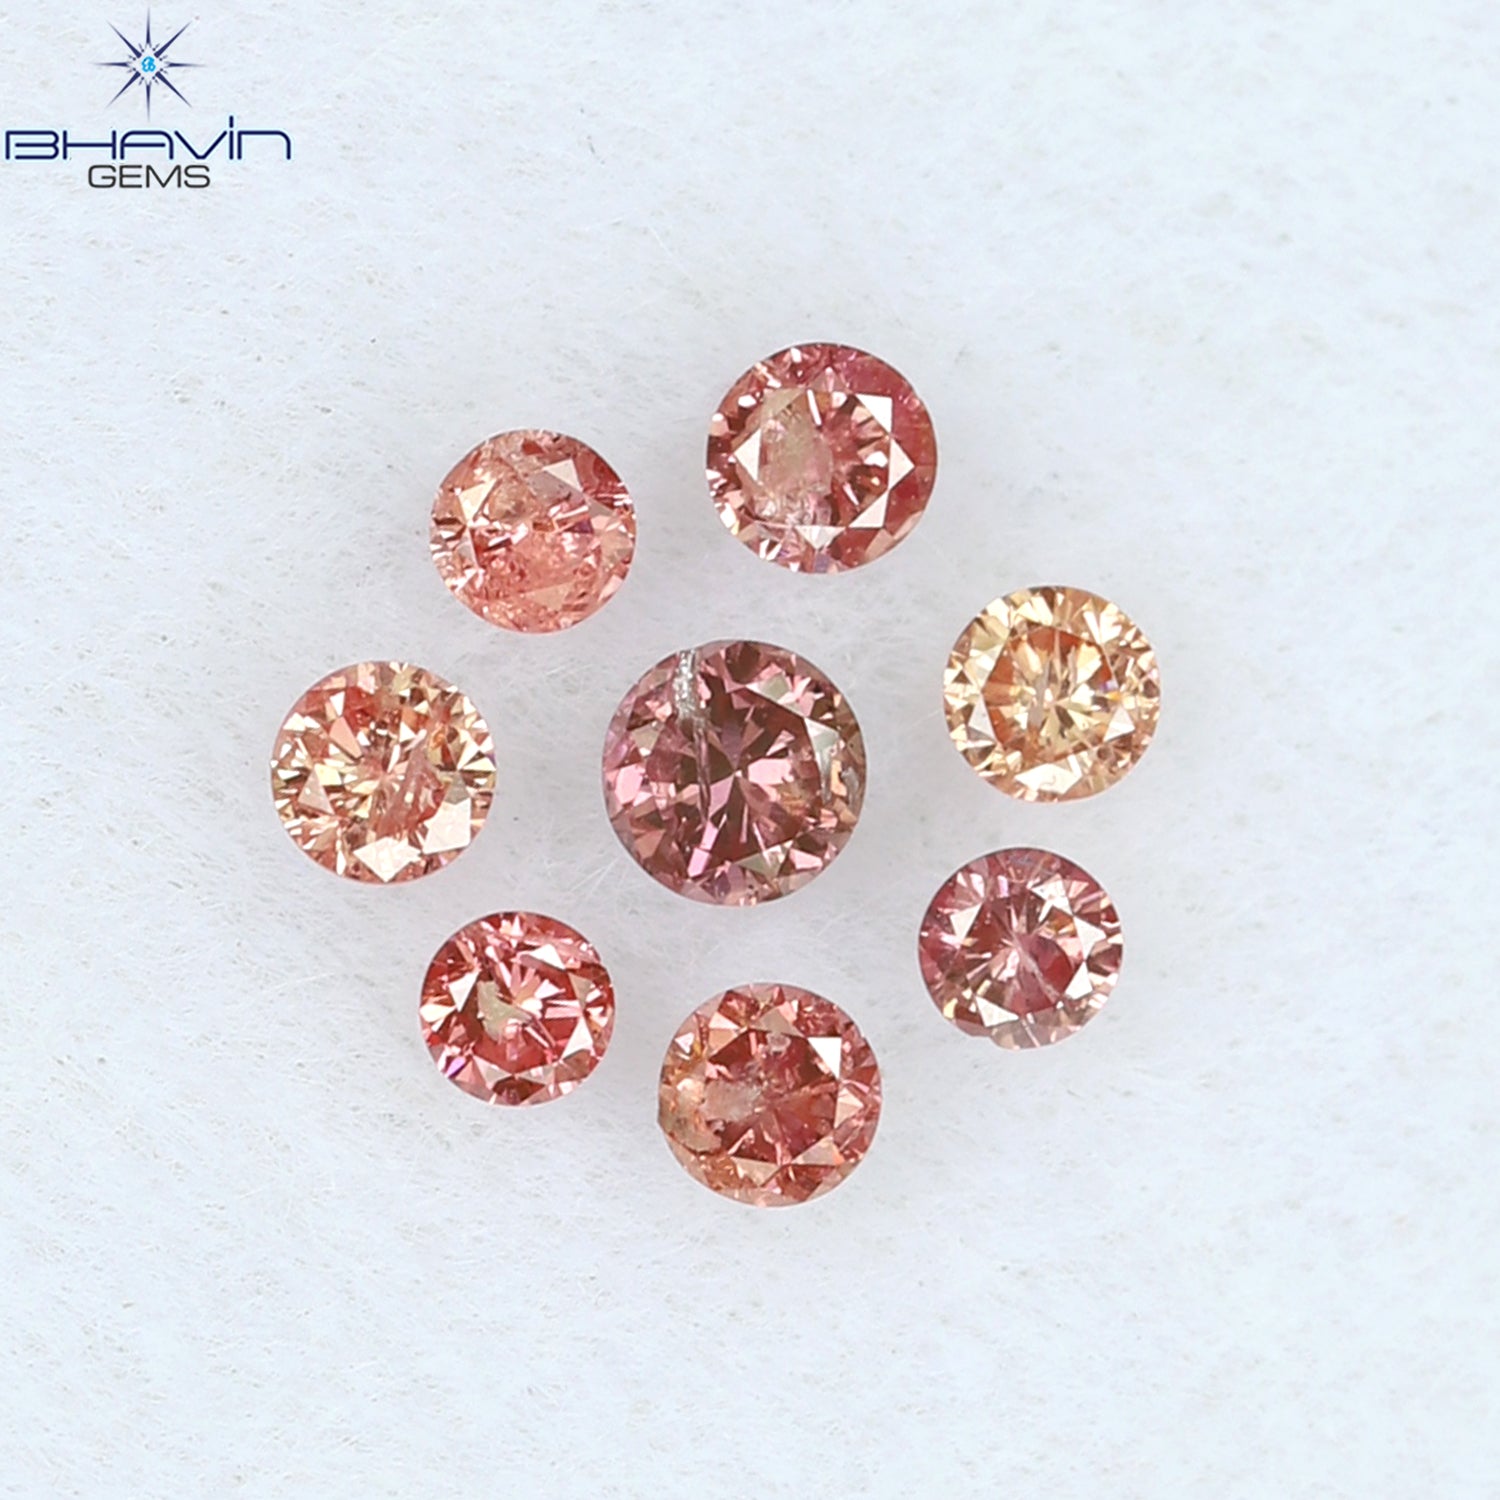 0.19 CT/8 Pcs Round Shape Natural Loose Diamond Pink Color I2 Clarity (2.00 MM)